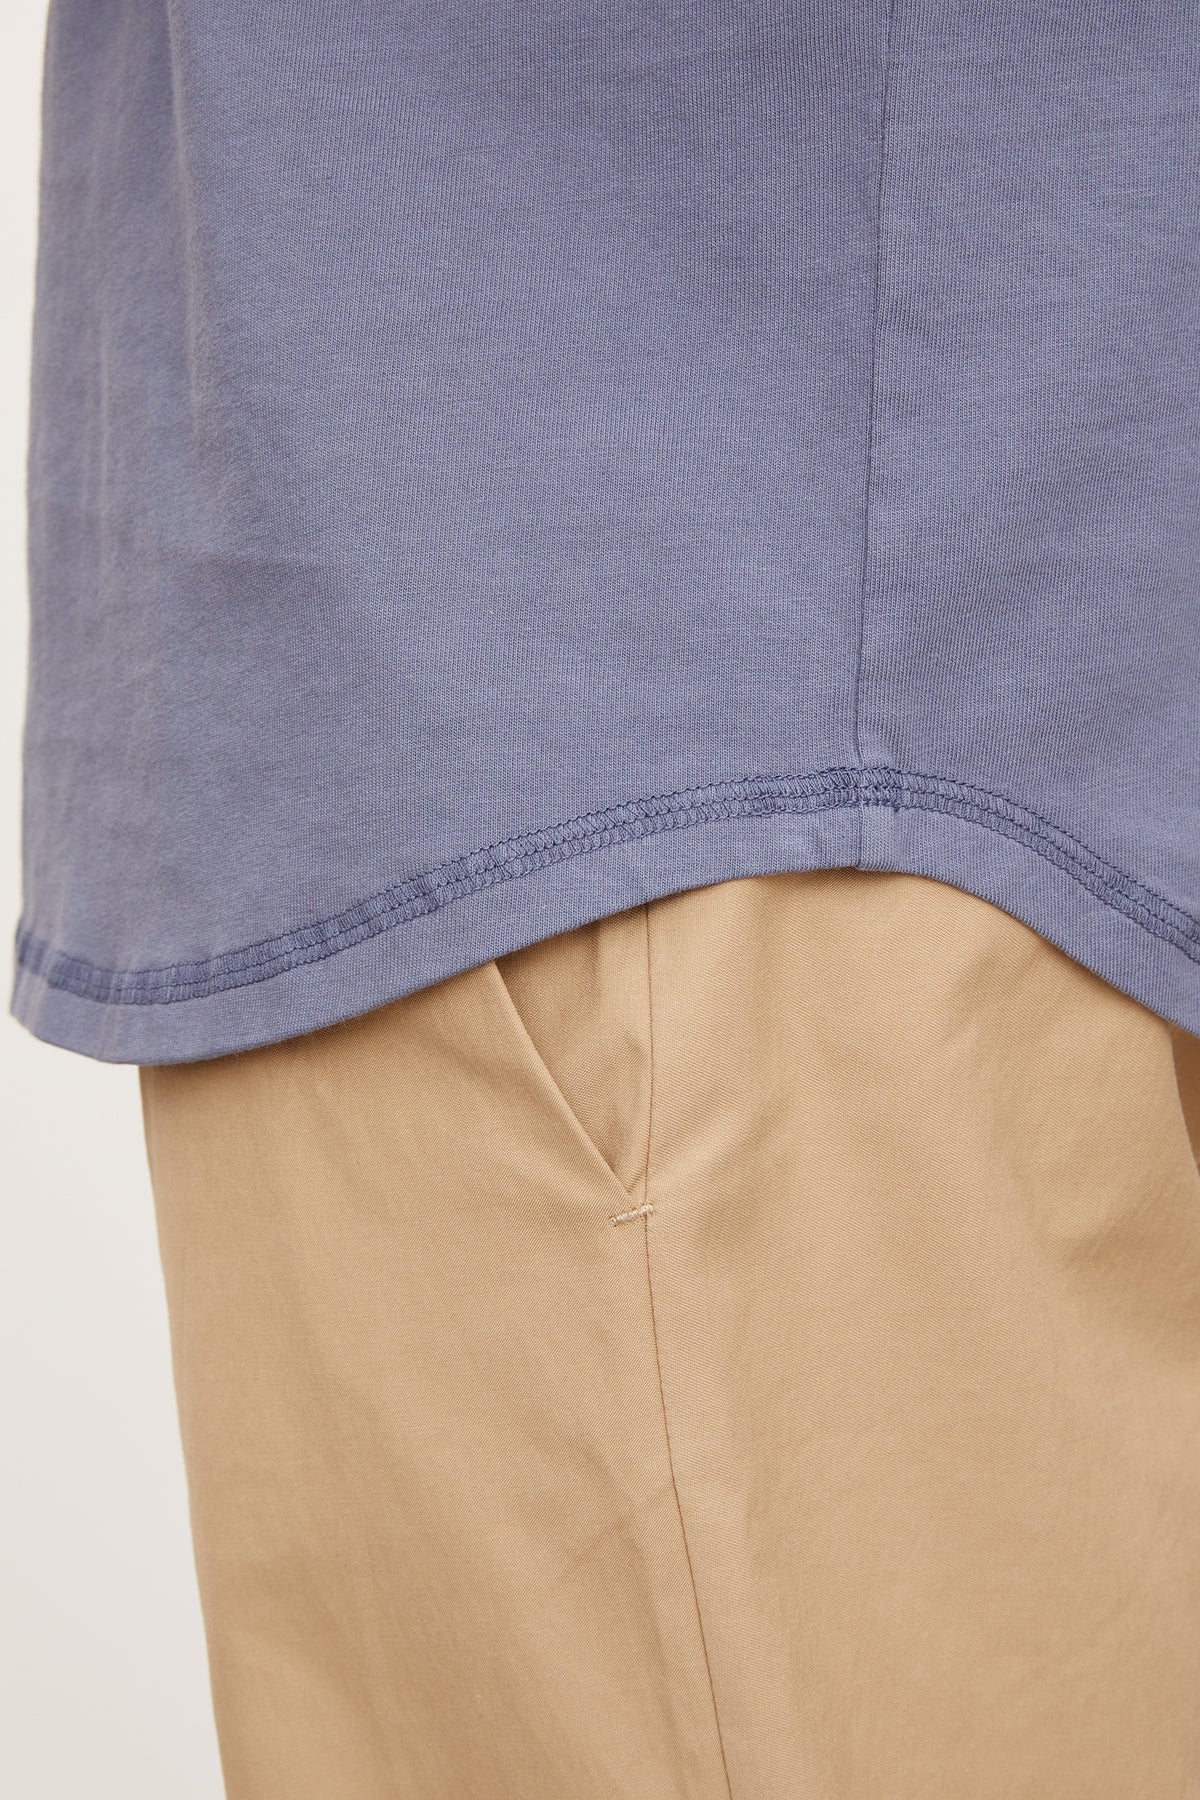   Close-up of a blue cotton knit DEON HENLEY shirt hem over beige trousers, focusing on the fabric and stitching detail by Velvet by Graham & Spencer. 